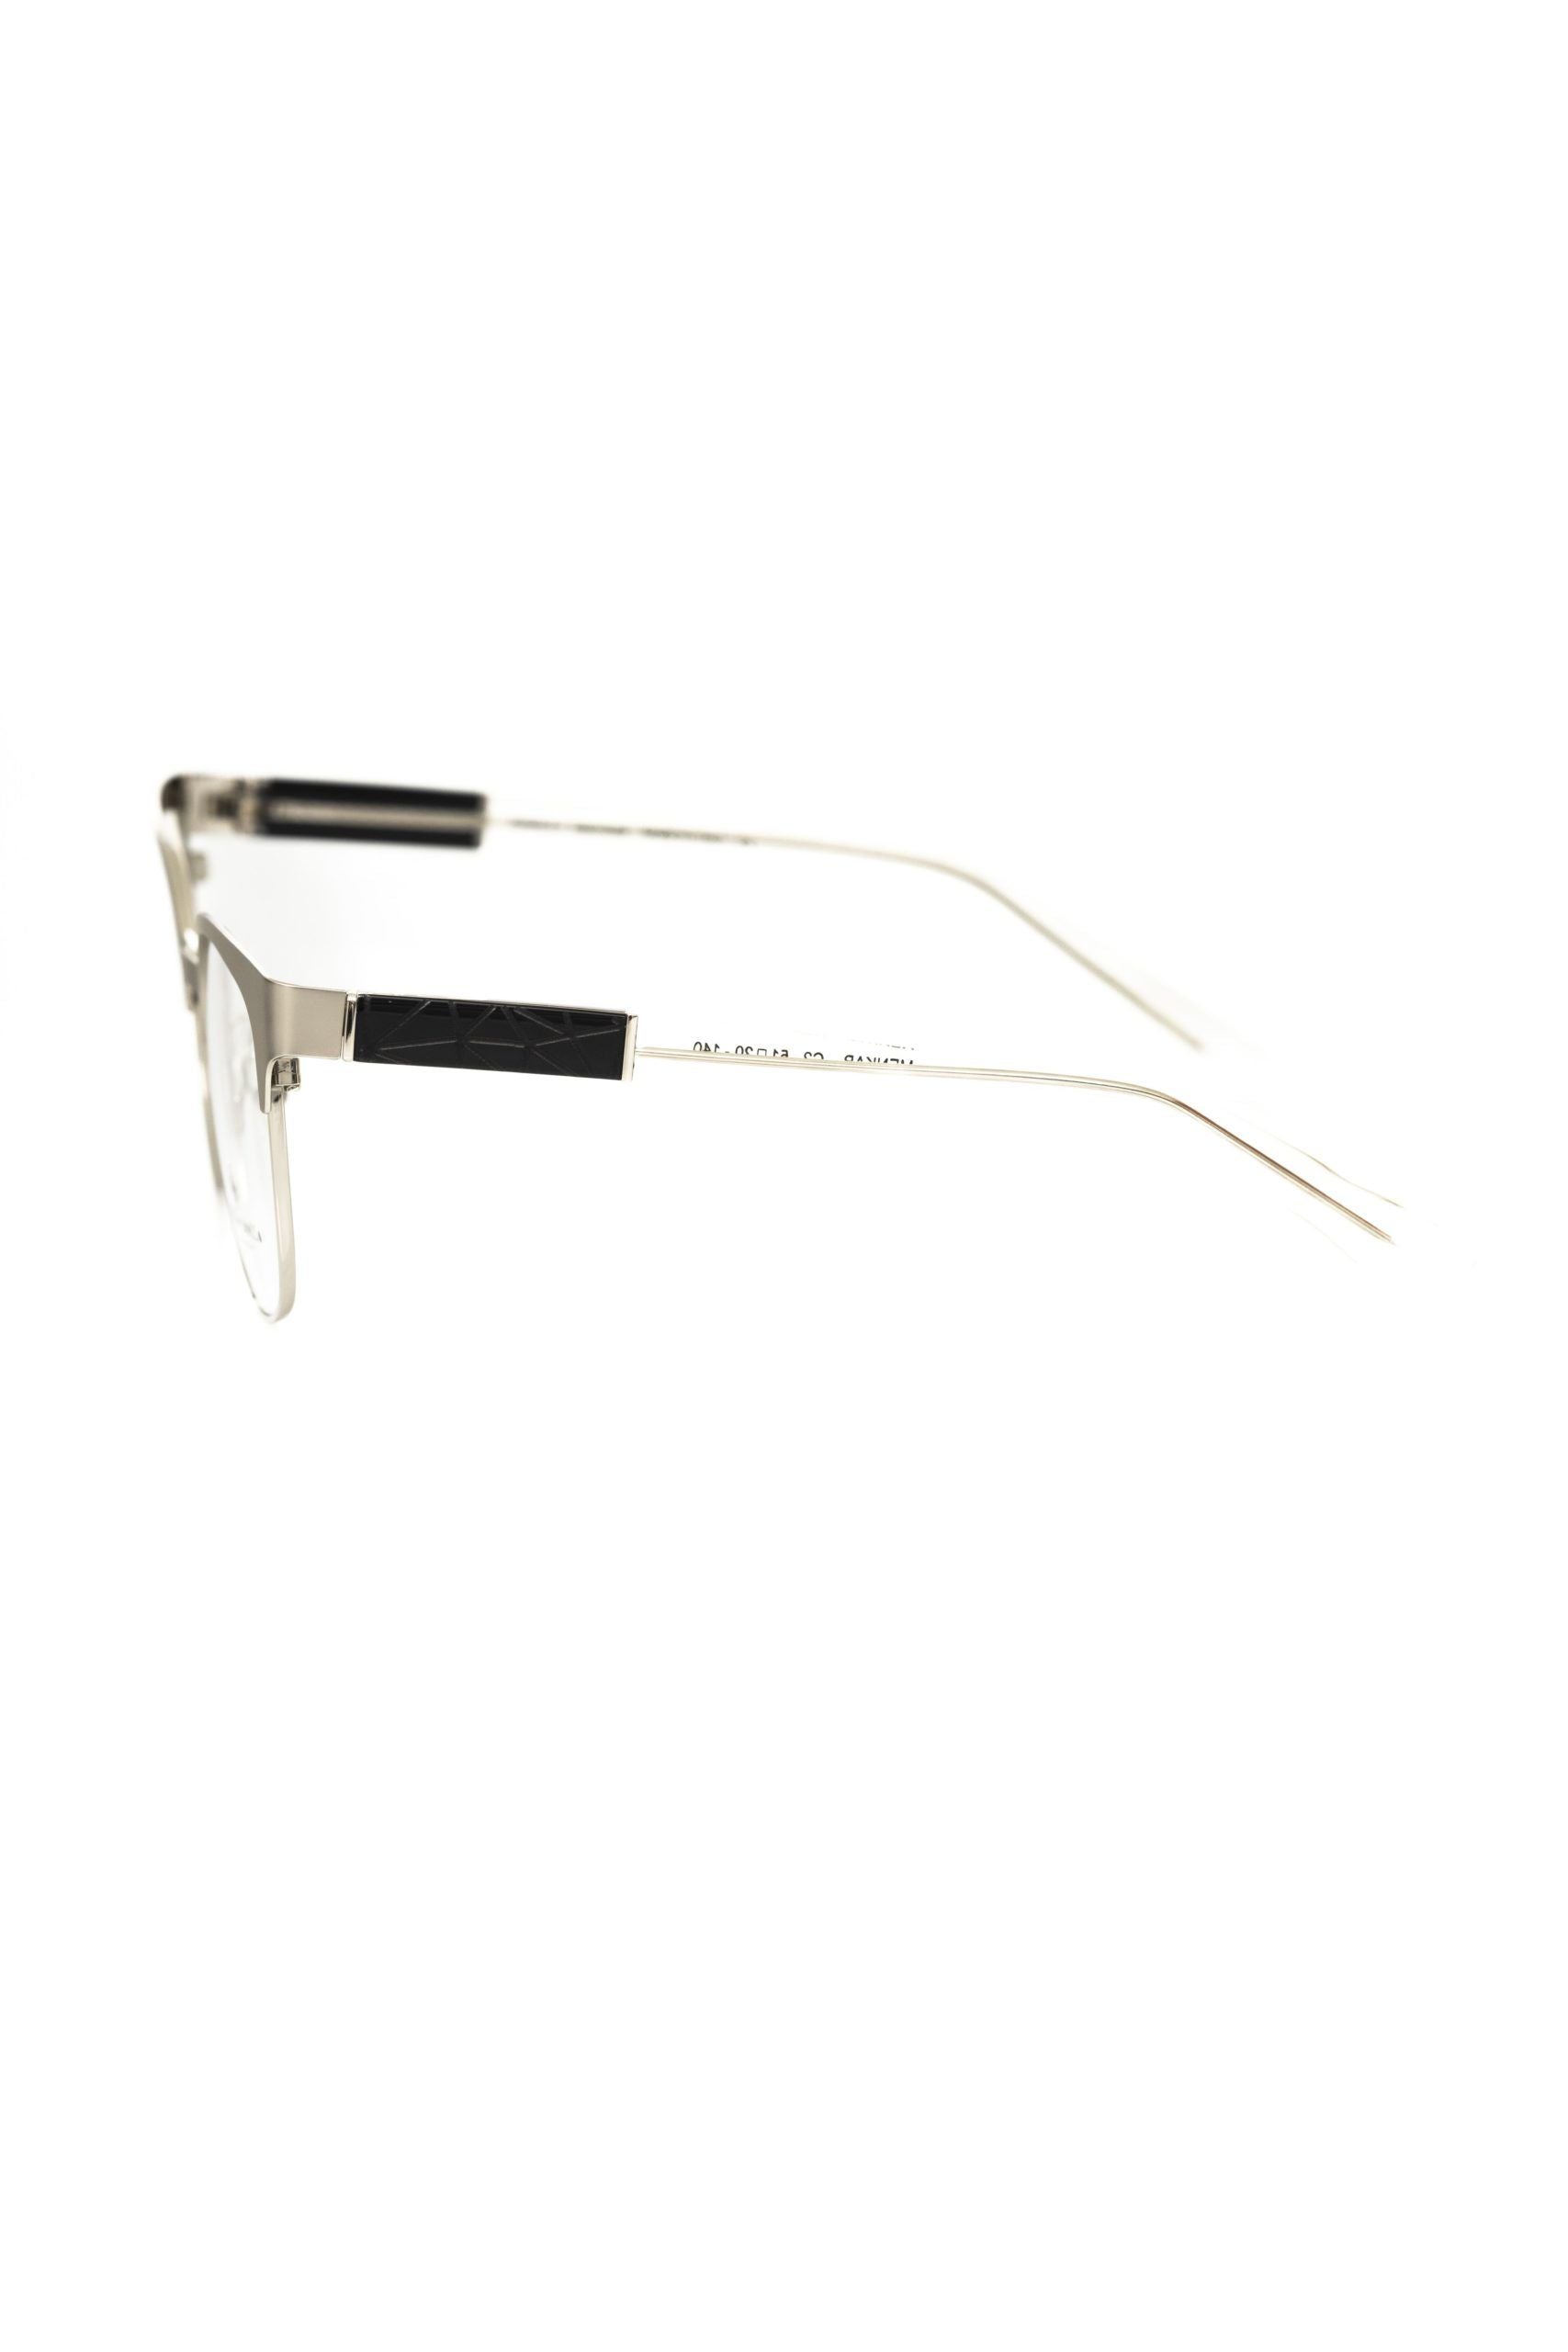 Frankie Morello FRMO-22120 Black Acetate Frames - Designed by Frankie Morello Available to Buy at a Discounted Price on Moon Behind The Hill Online Designer Discount Store